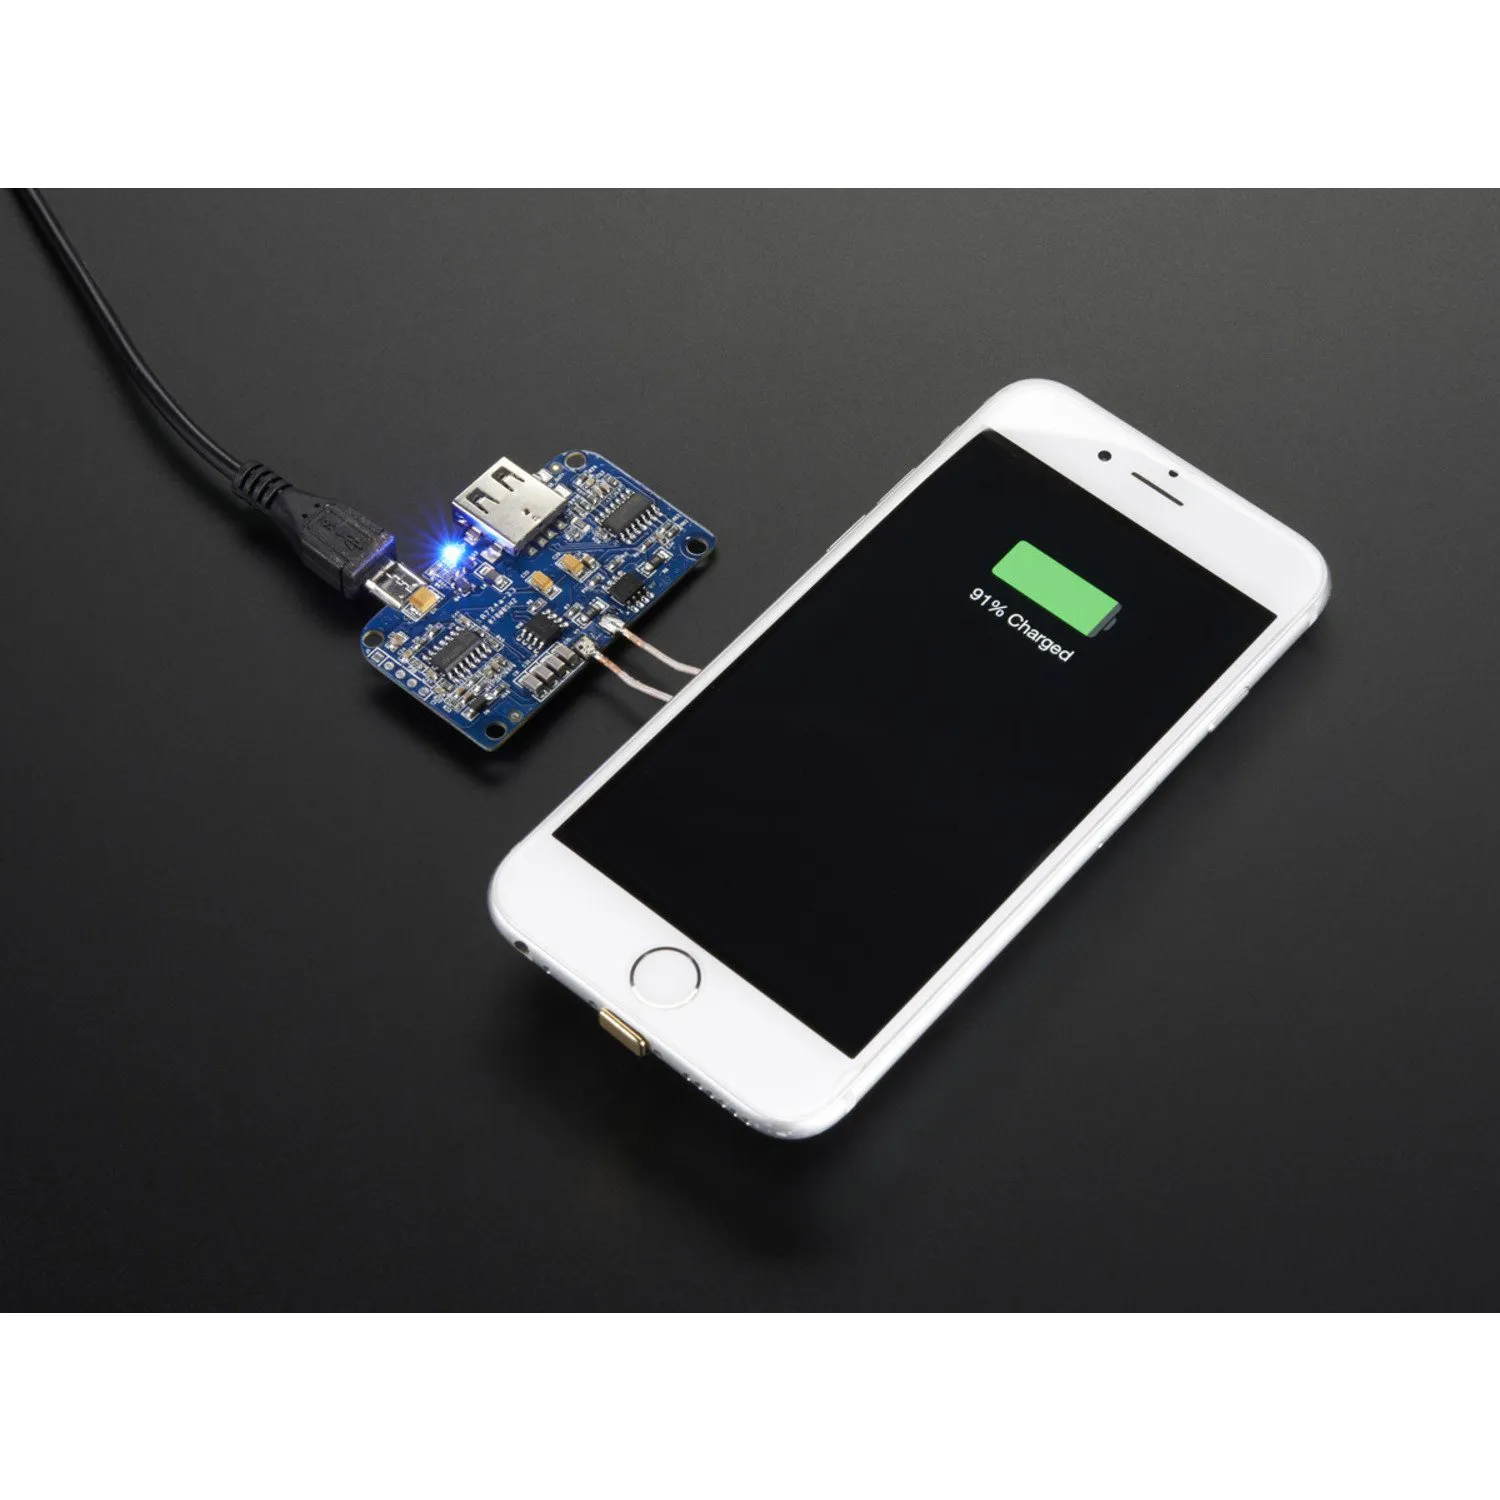 Photo of Qi Wireless Charging Module - 20mm - Lightning Connector